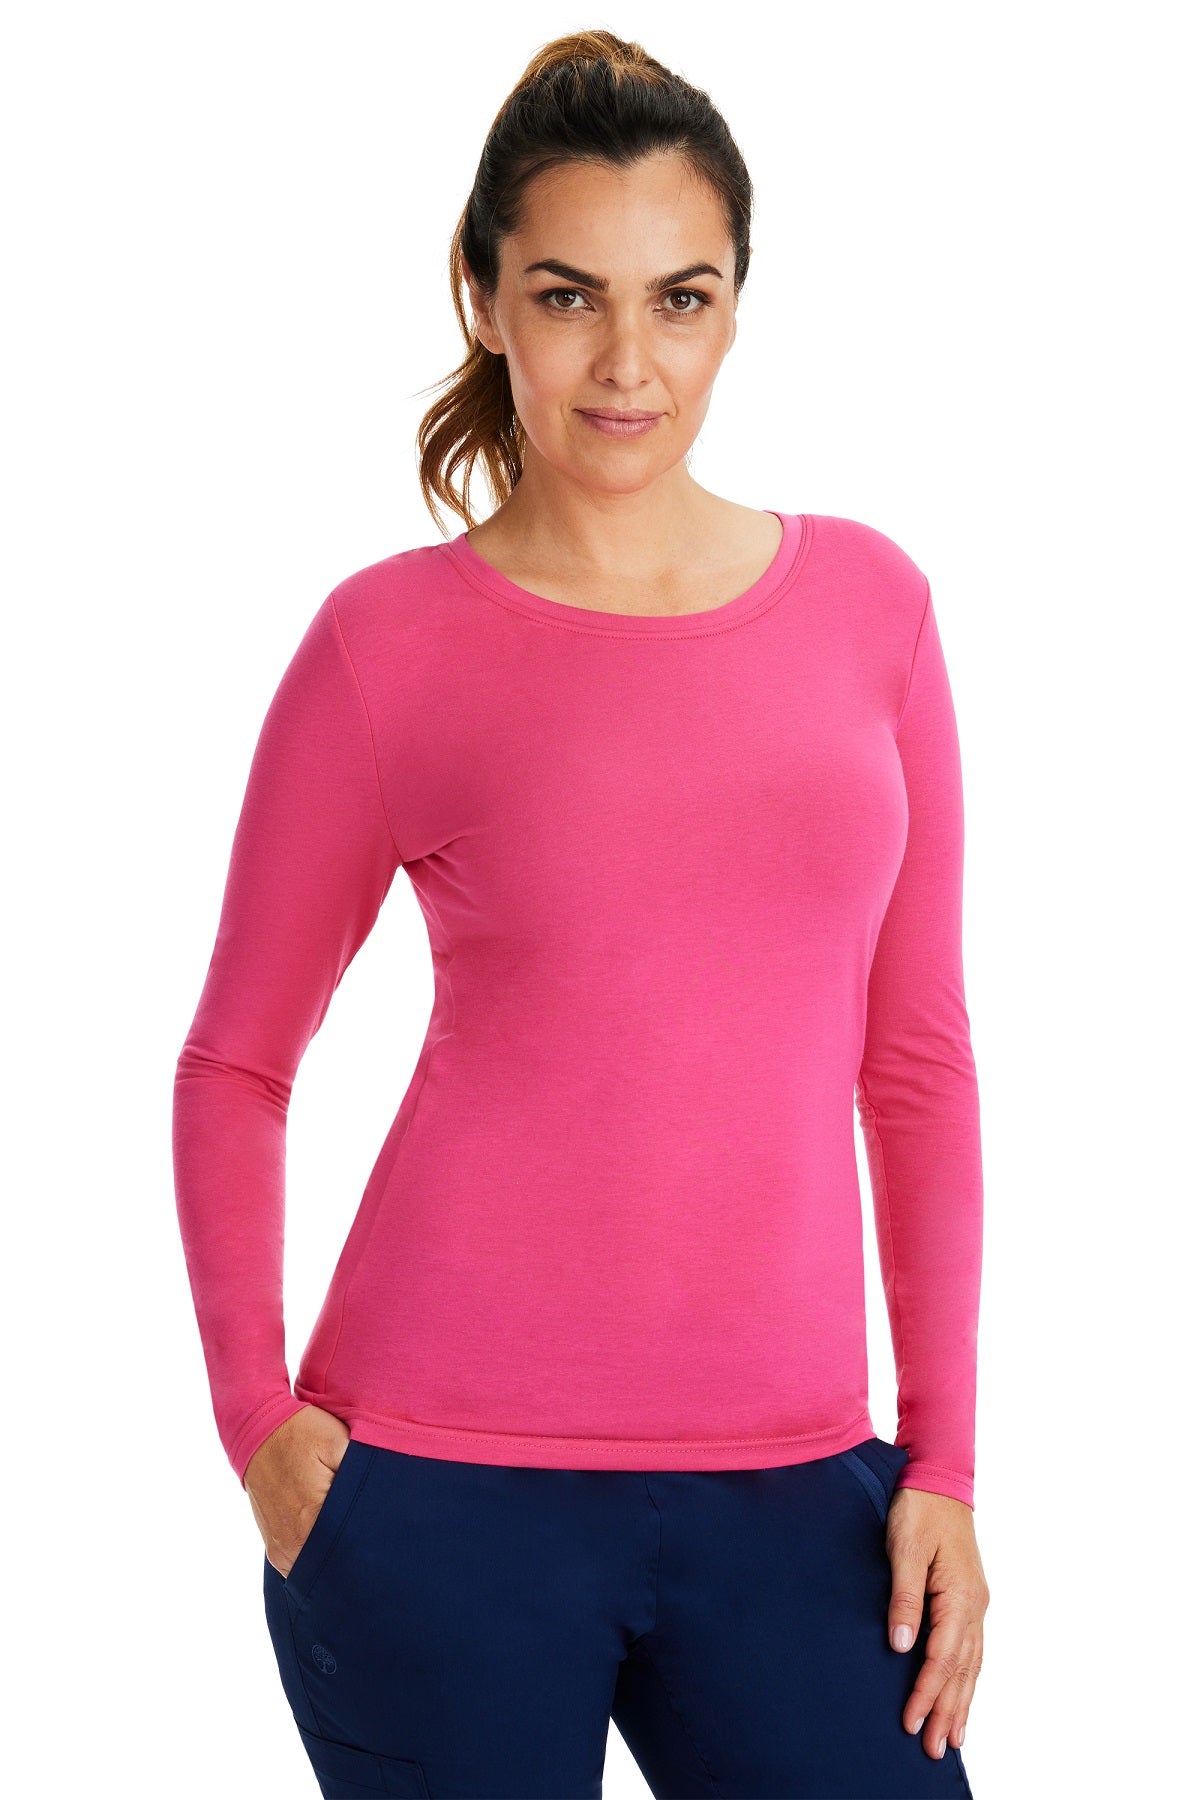 Healing Hands Purple Label Melissa Long Sleeve Tee in Pink at Parker's Clothing and Shoes.